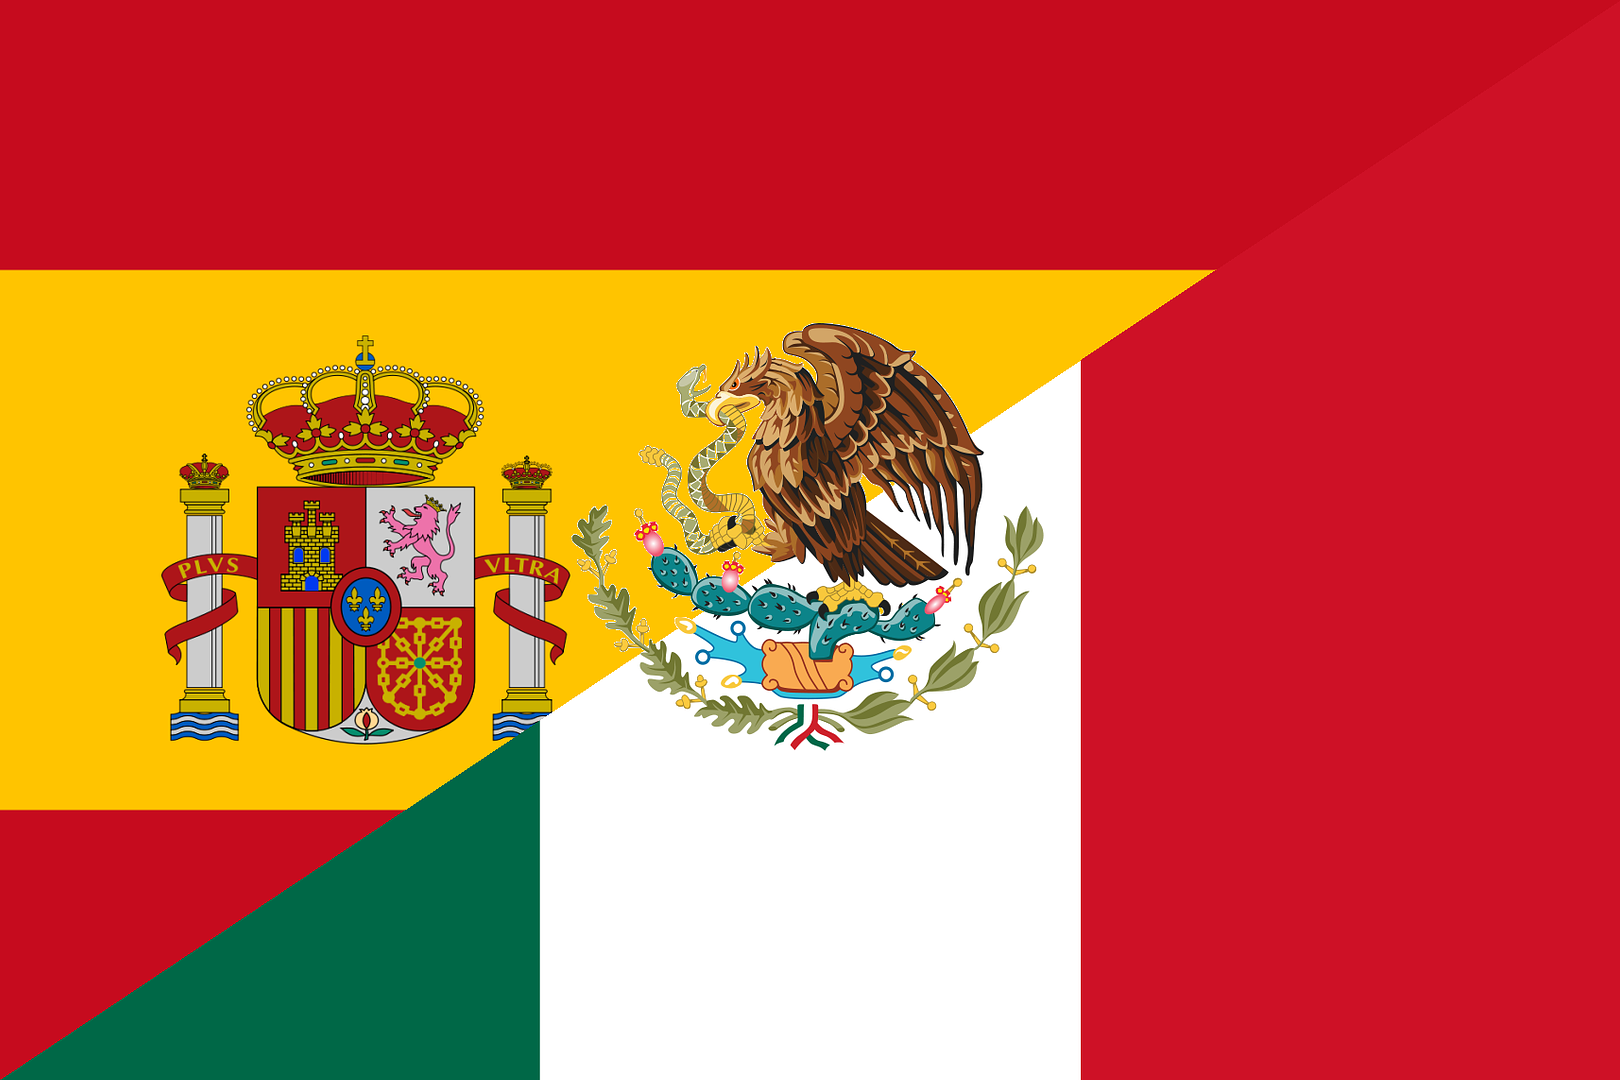  photo Flag_of_Spain_and_Mexico_zps35lyyywn.png